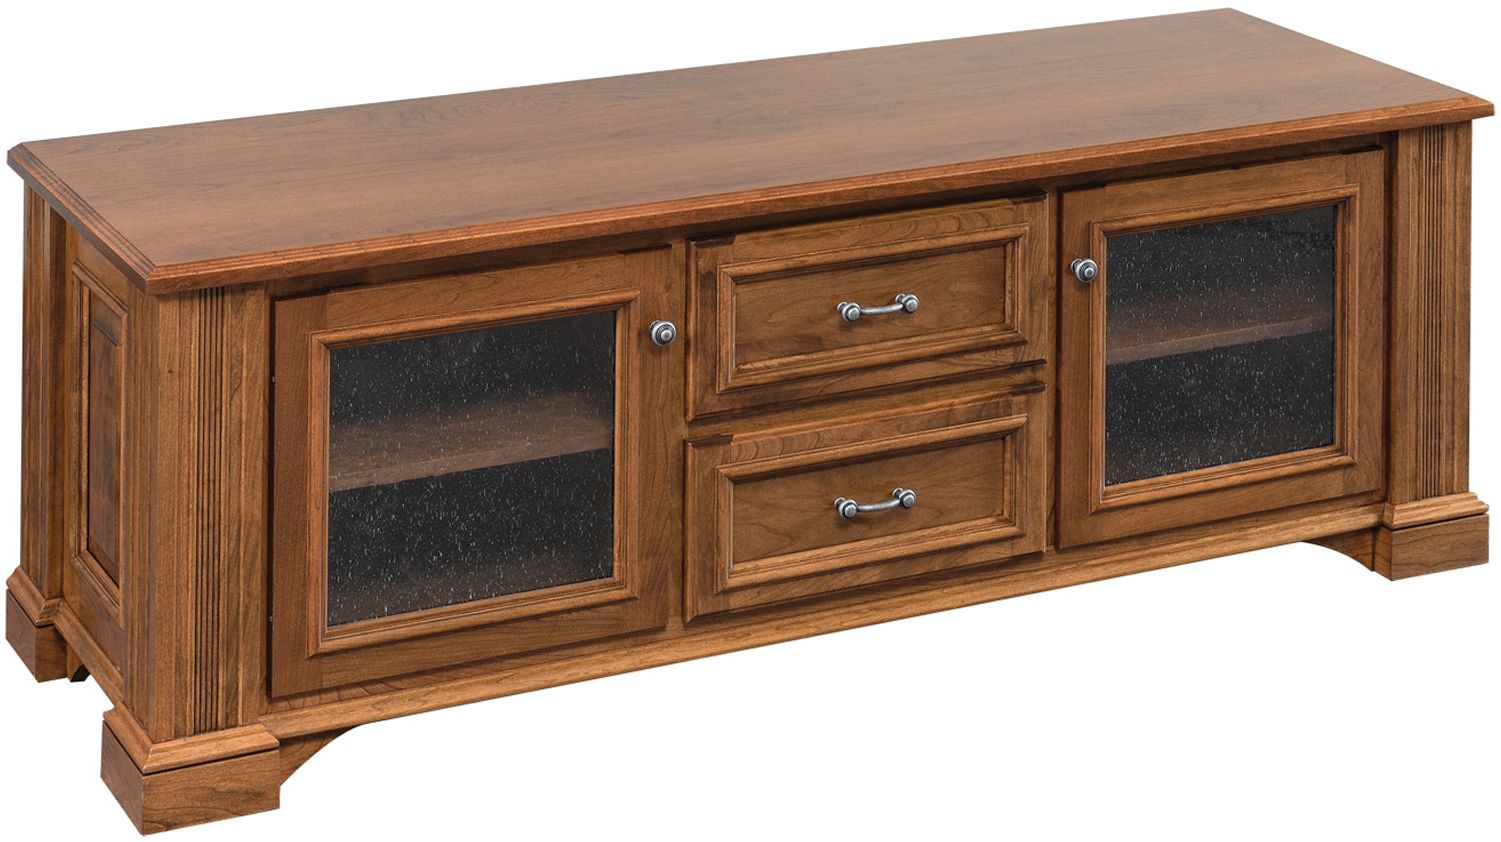 Lincoln Deluxe Plasma Tv Stand | Amish Solid Hardwood Tv Intended For Dillon Tv Stands Oak (Gallery 3 of 20)